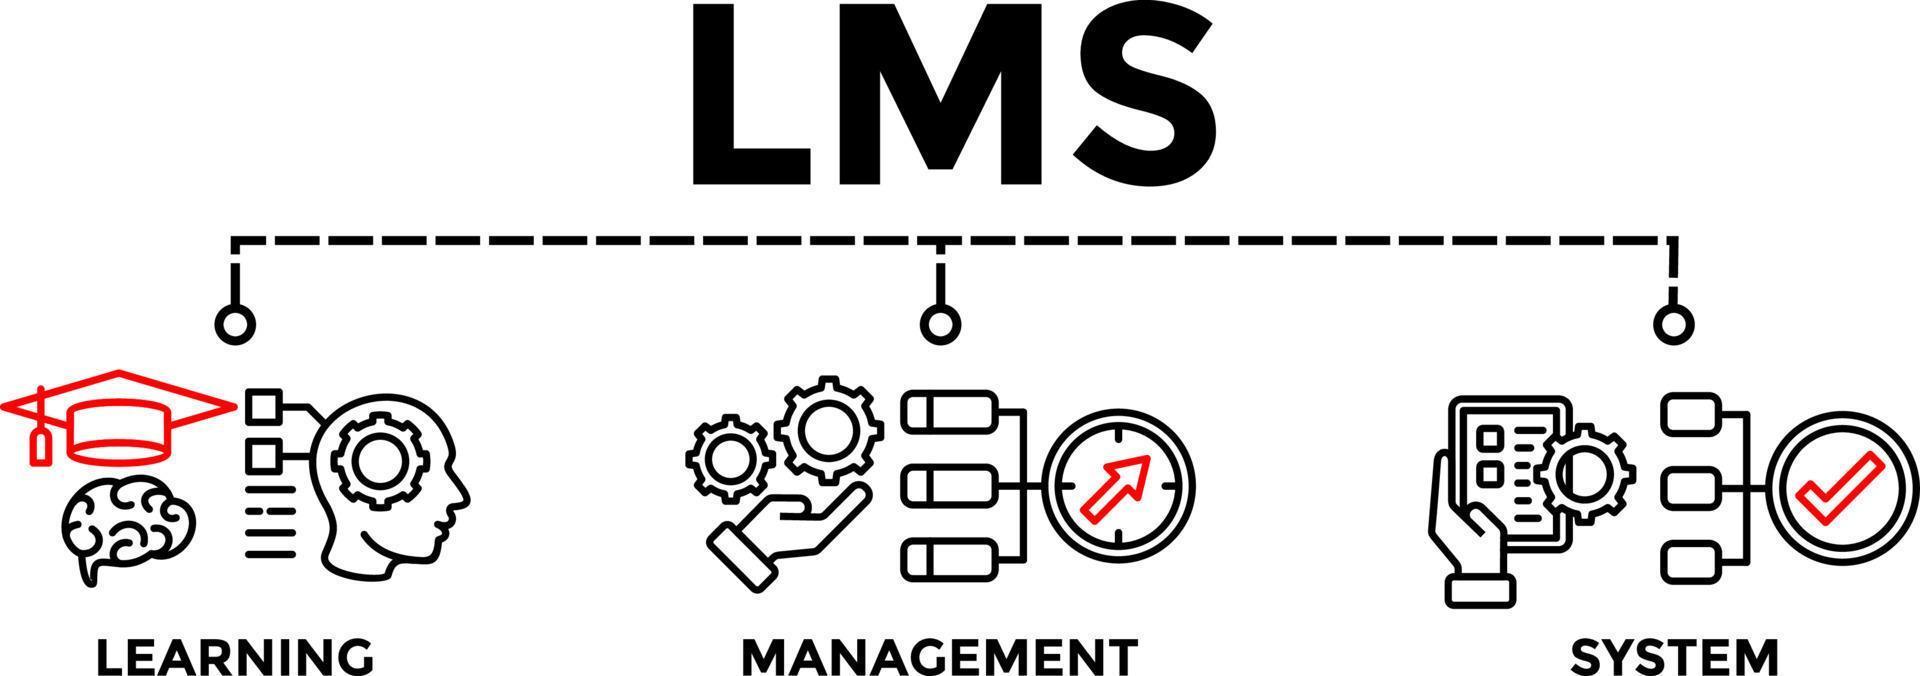 LMS - Learning Management System. LMS Banner Web Vector Illustration Concept for with icons.